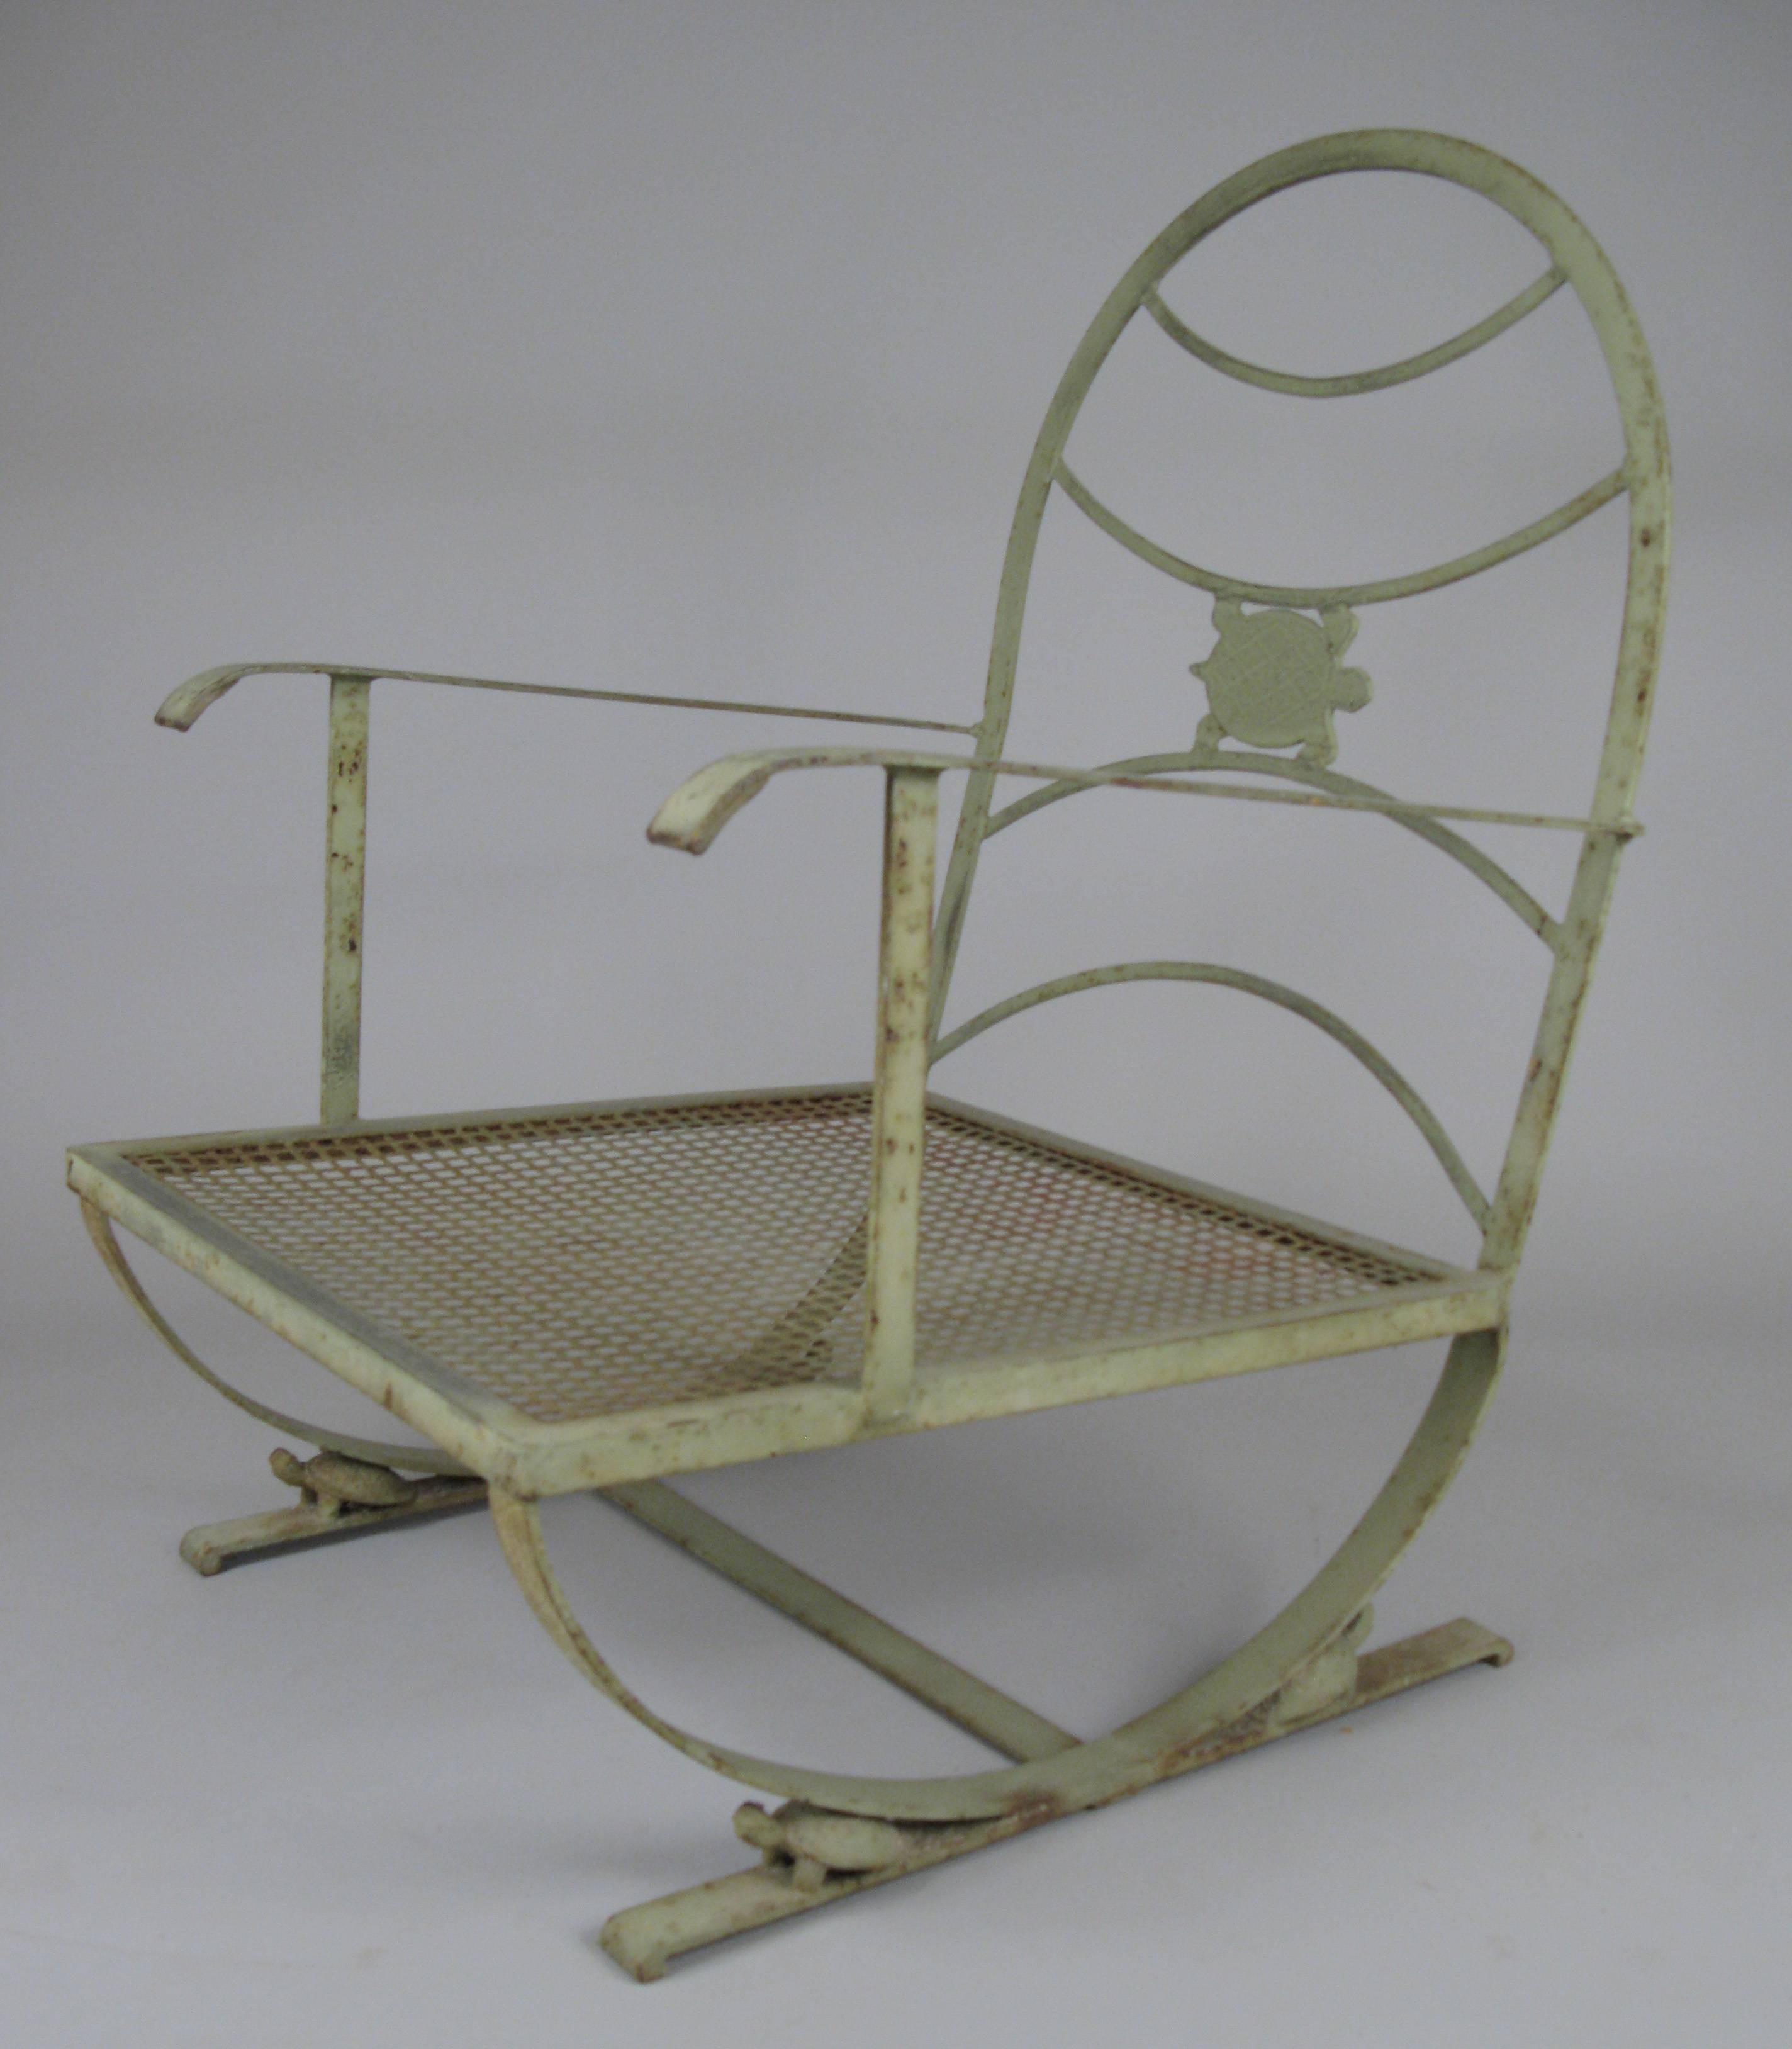 A very well made vintage wrought iron lounge chair with a turtle motif in the seatback and small turtles on the base as well. Large-scale and in its original pale green finish.